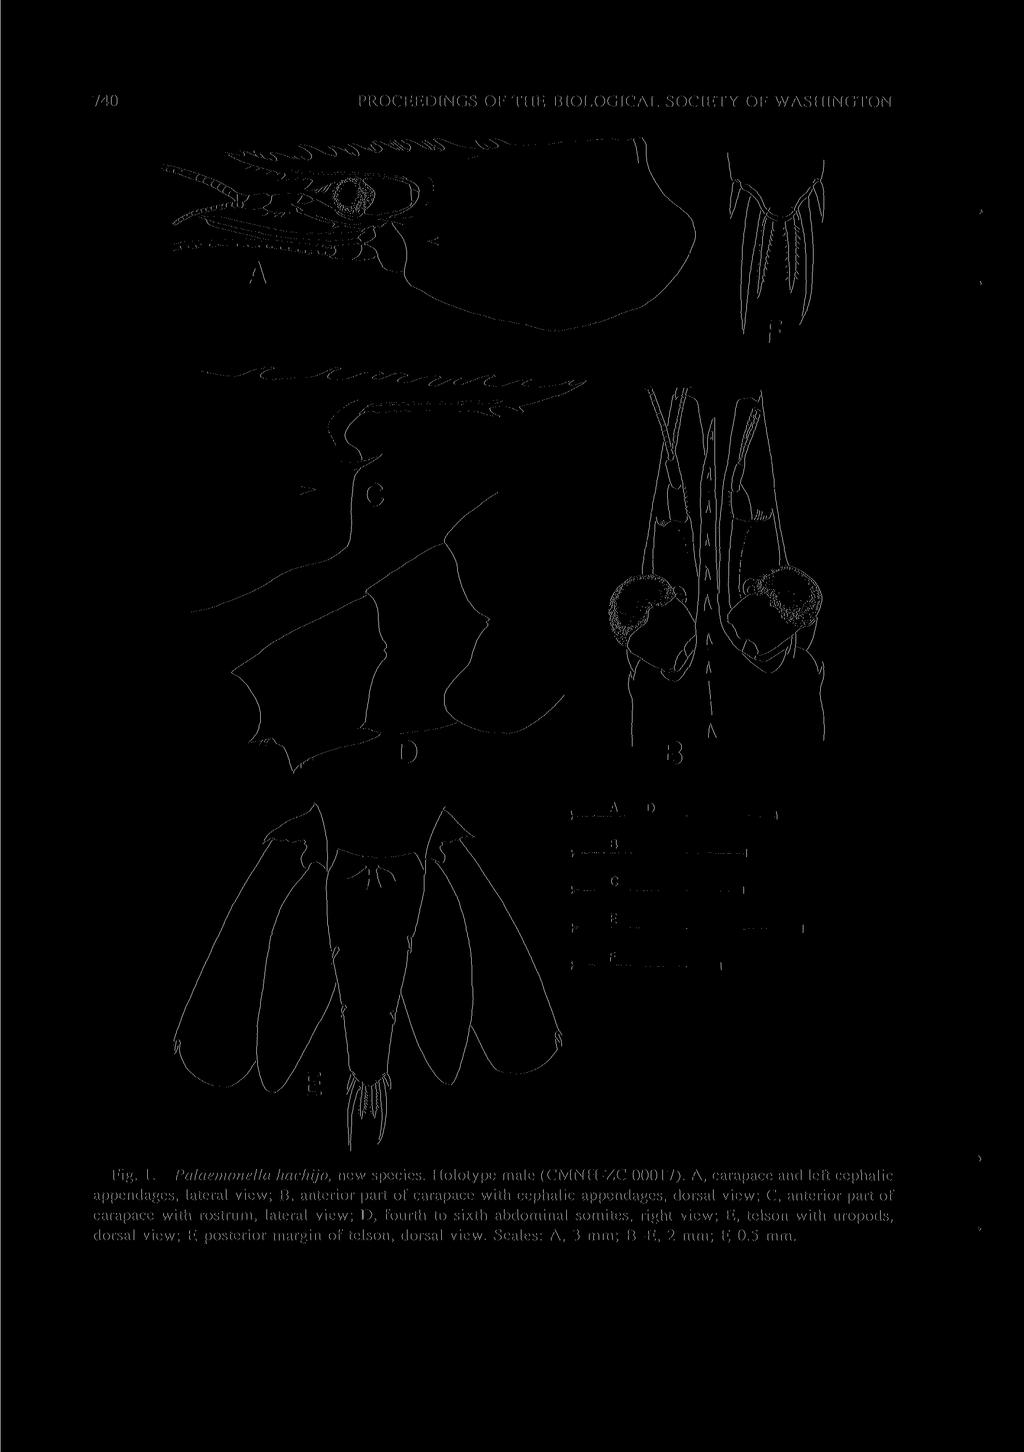 740 PROCEEDINGS OF THE BIOLOGICAL SOCIETY OF WASHINGTON Fig. 1. Palaemonella hachijo, new species. Holotype male (CMNFI-ZC 00017).